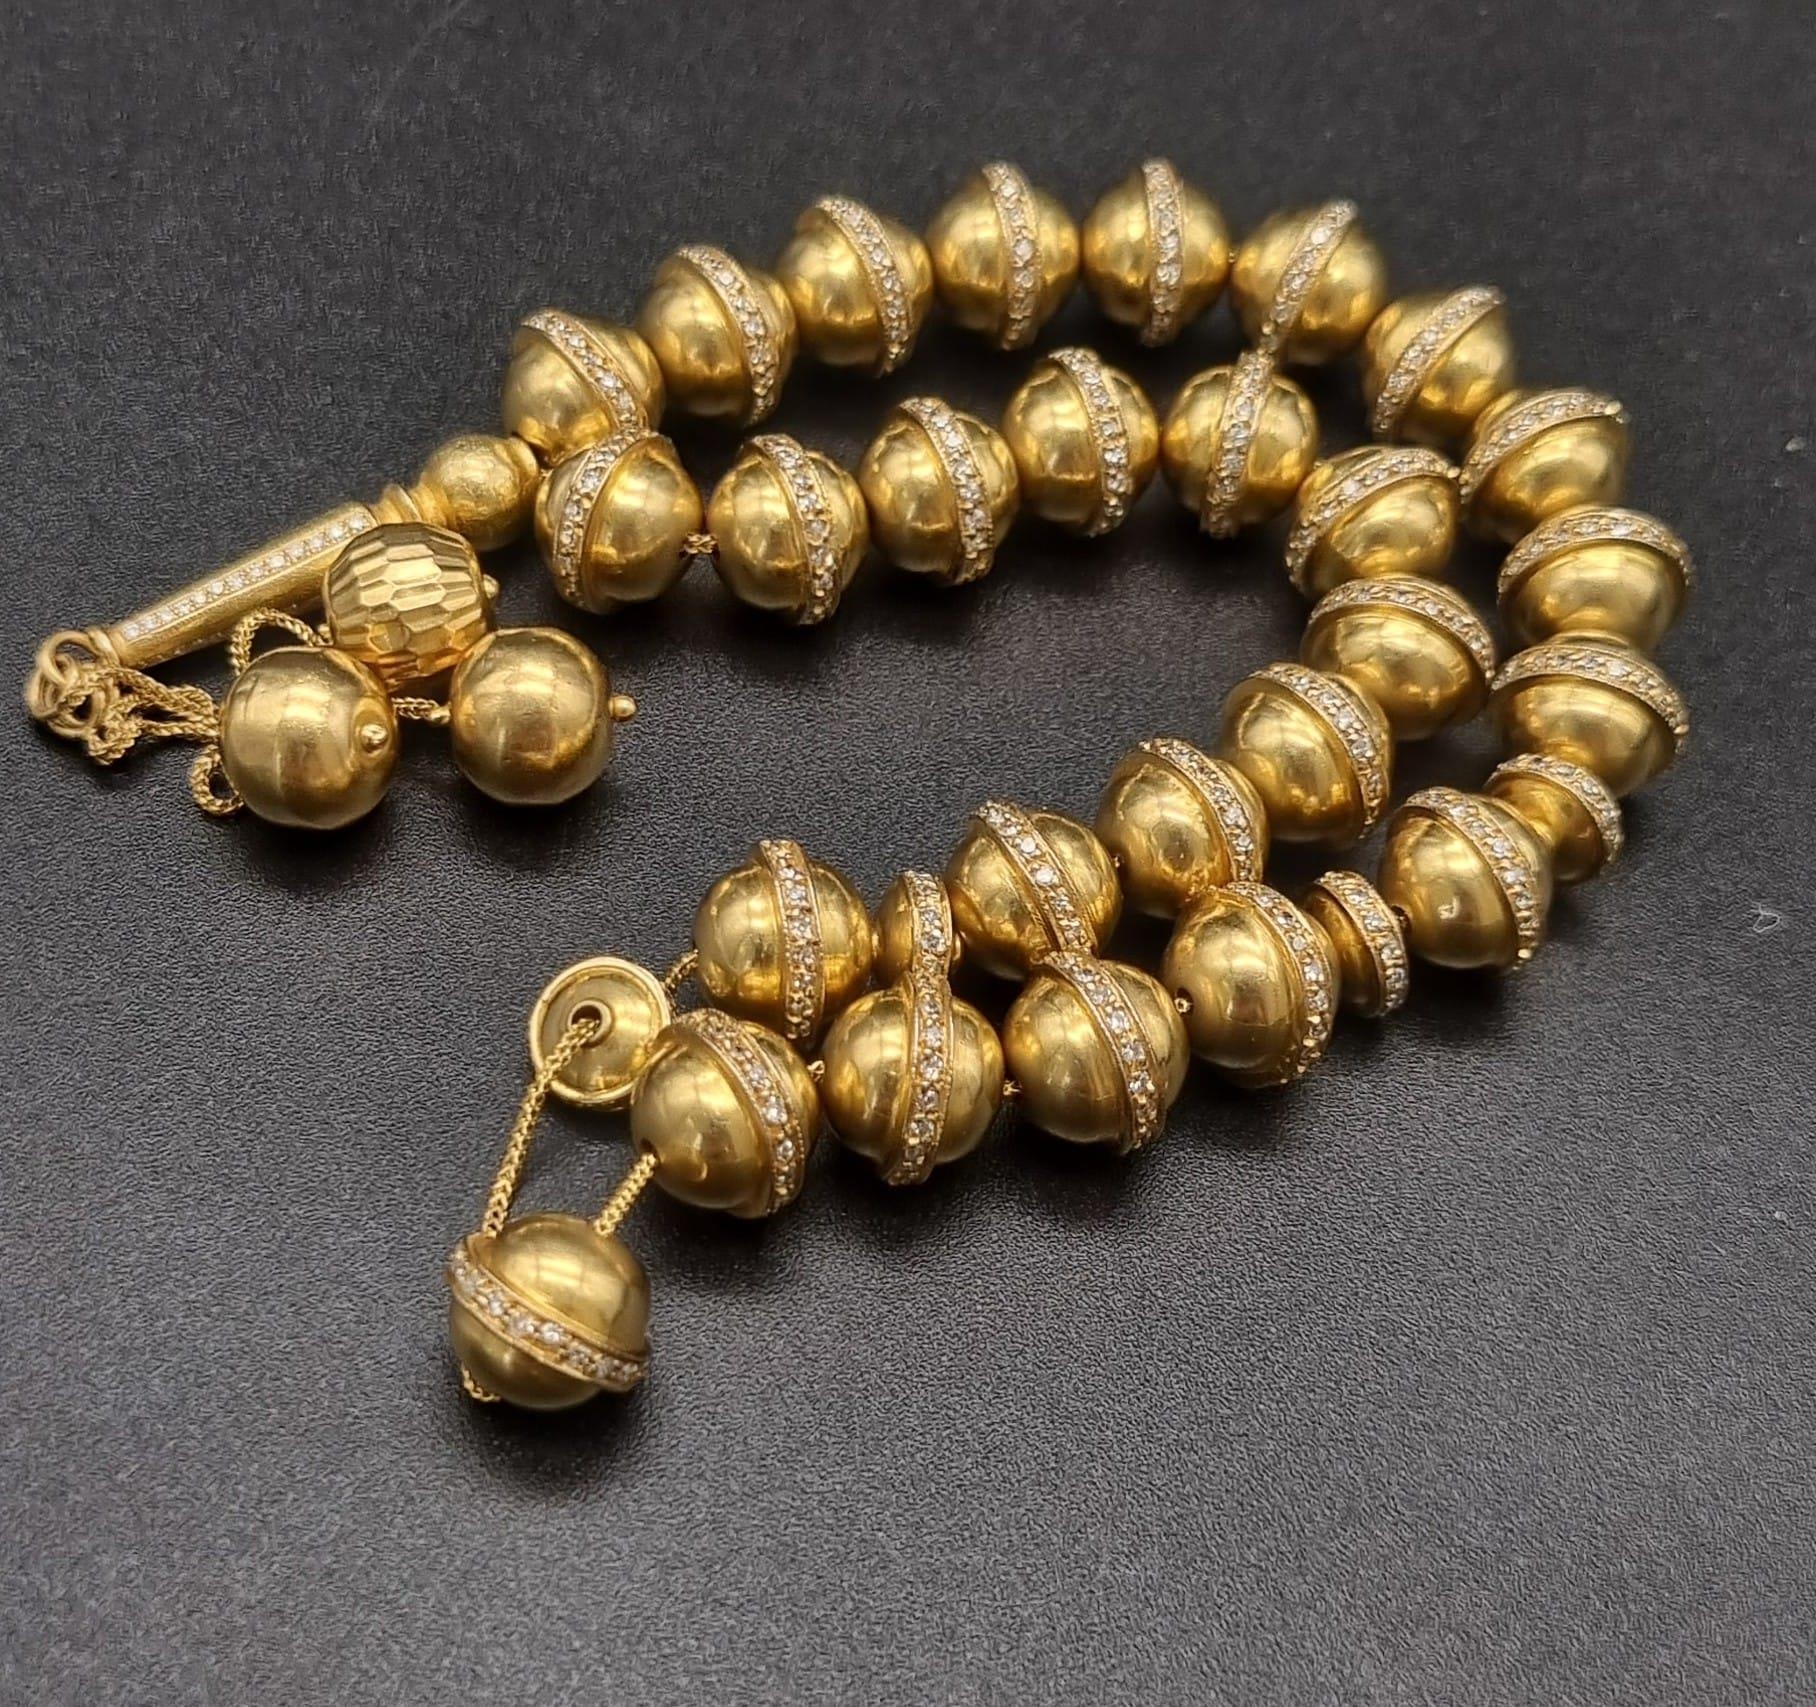 18K Gold & Diamond worry beads. (6ct approx) - Image 2 of 4